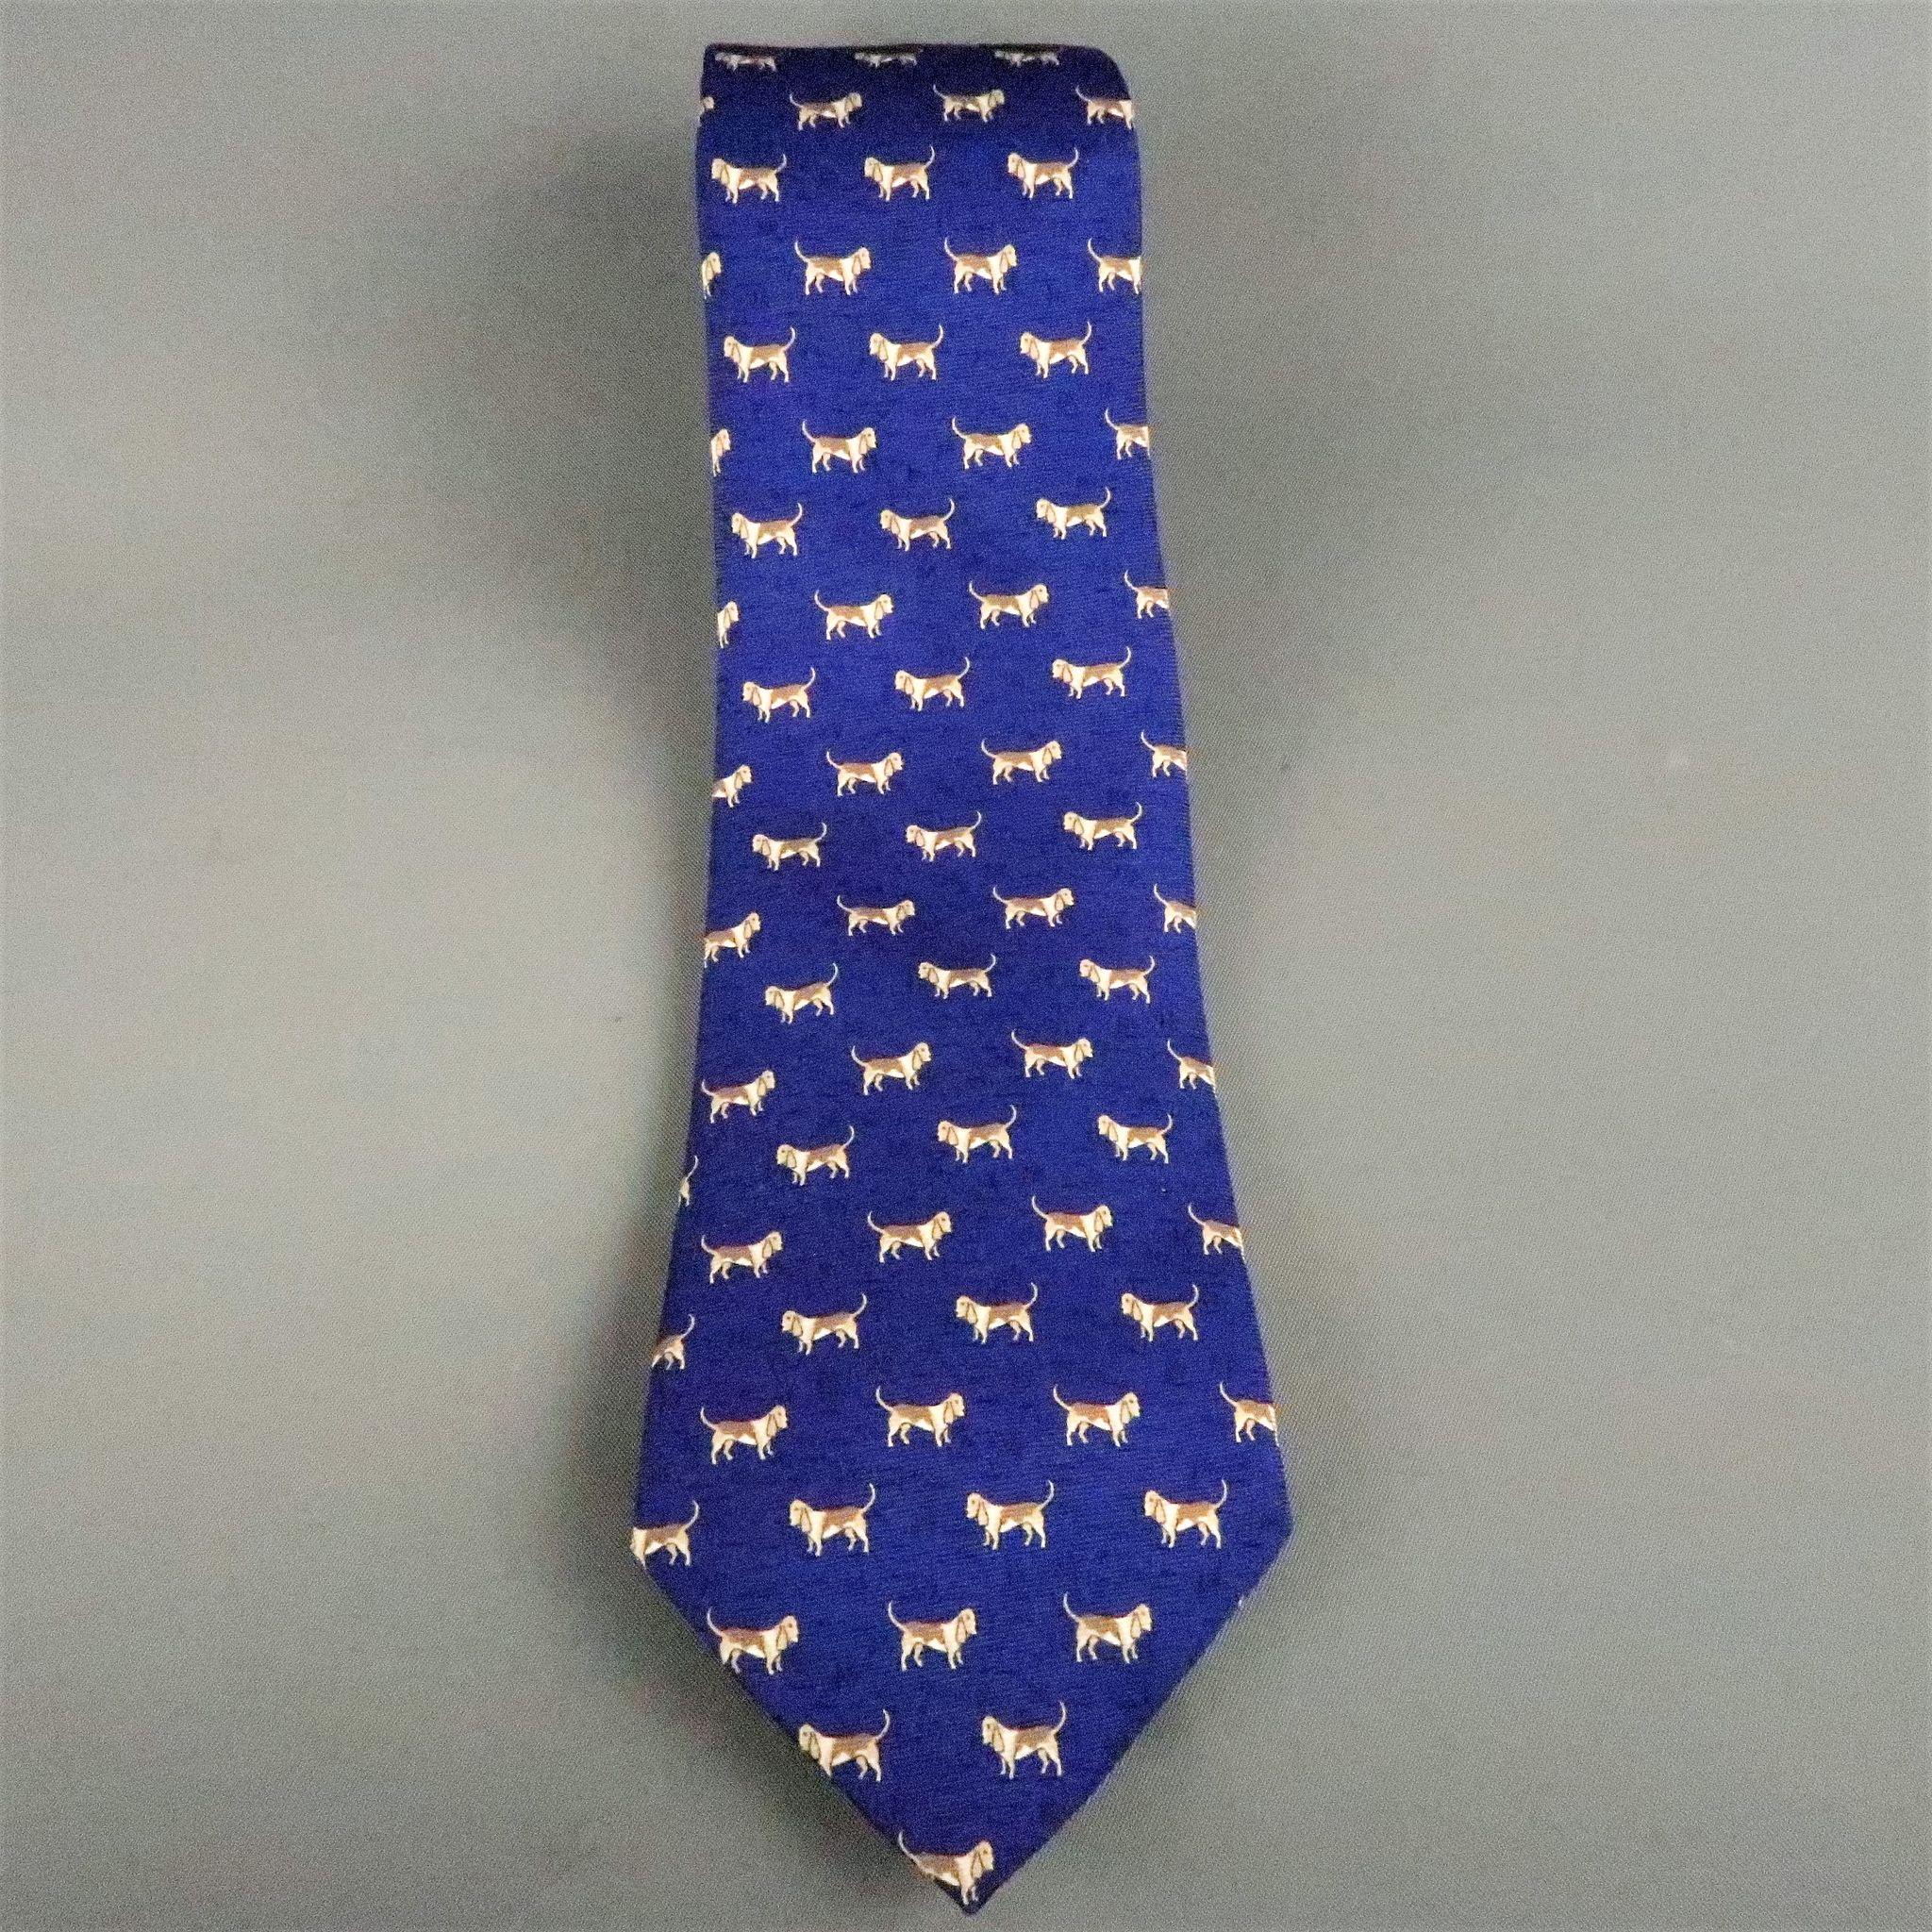 BATTISTONI Ties comes in a navy silk with all over dog print pattern. Made in Italy.


Excellent Pre-Owned Condition.


l Width : 3.89 in.

SKU: 87170
Category: Tie

More Details
Brand: BATTISTONI
Pattern: Print
Color: Navy
Fabric: Silk
Age Group: